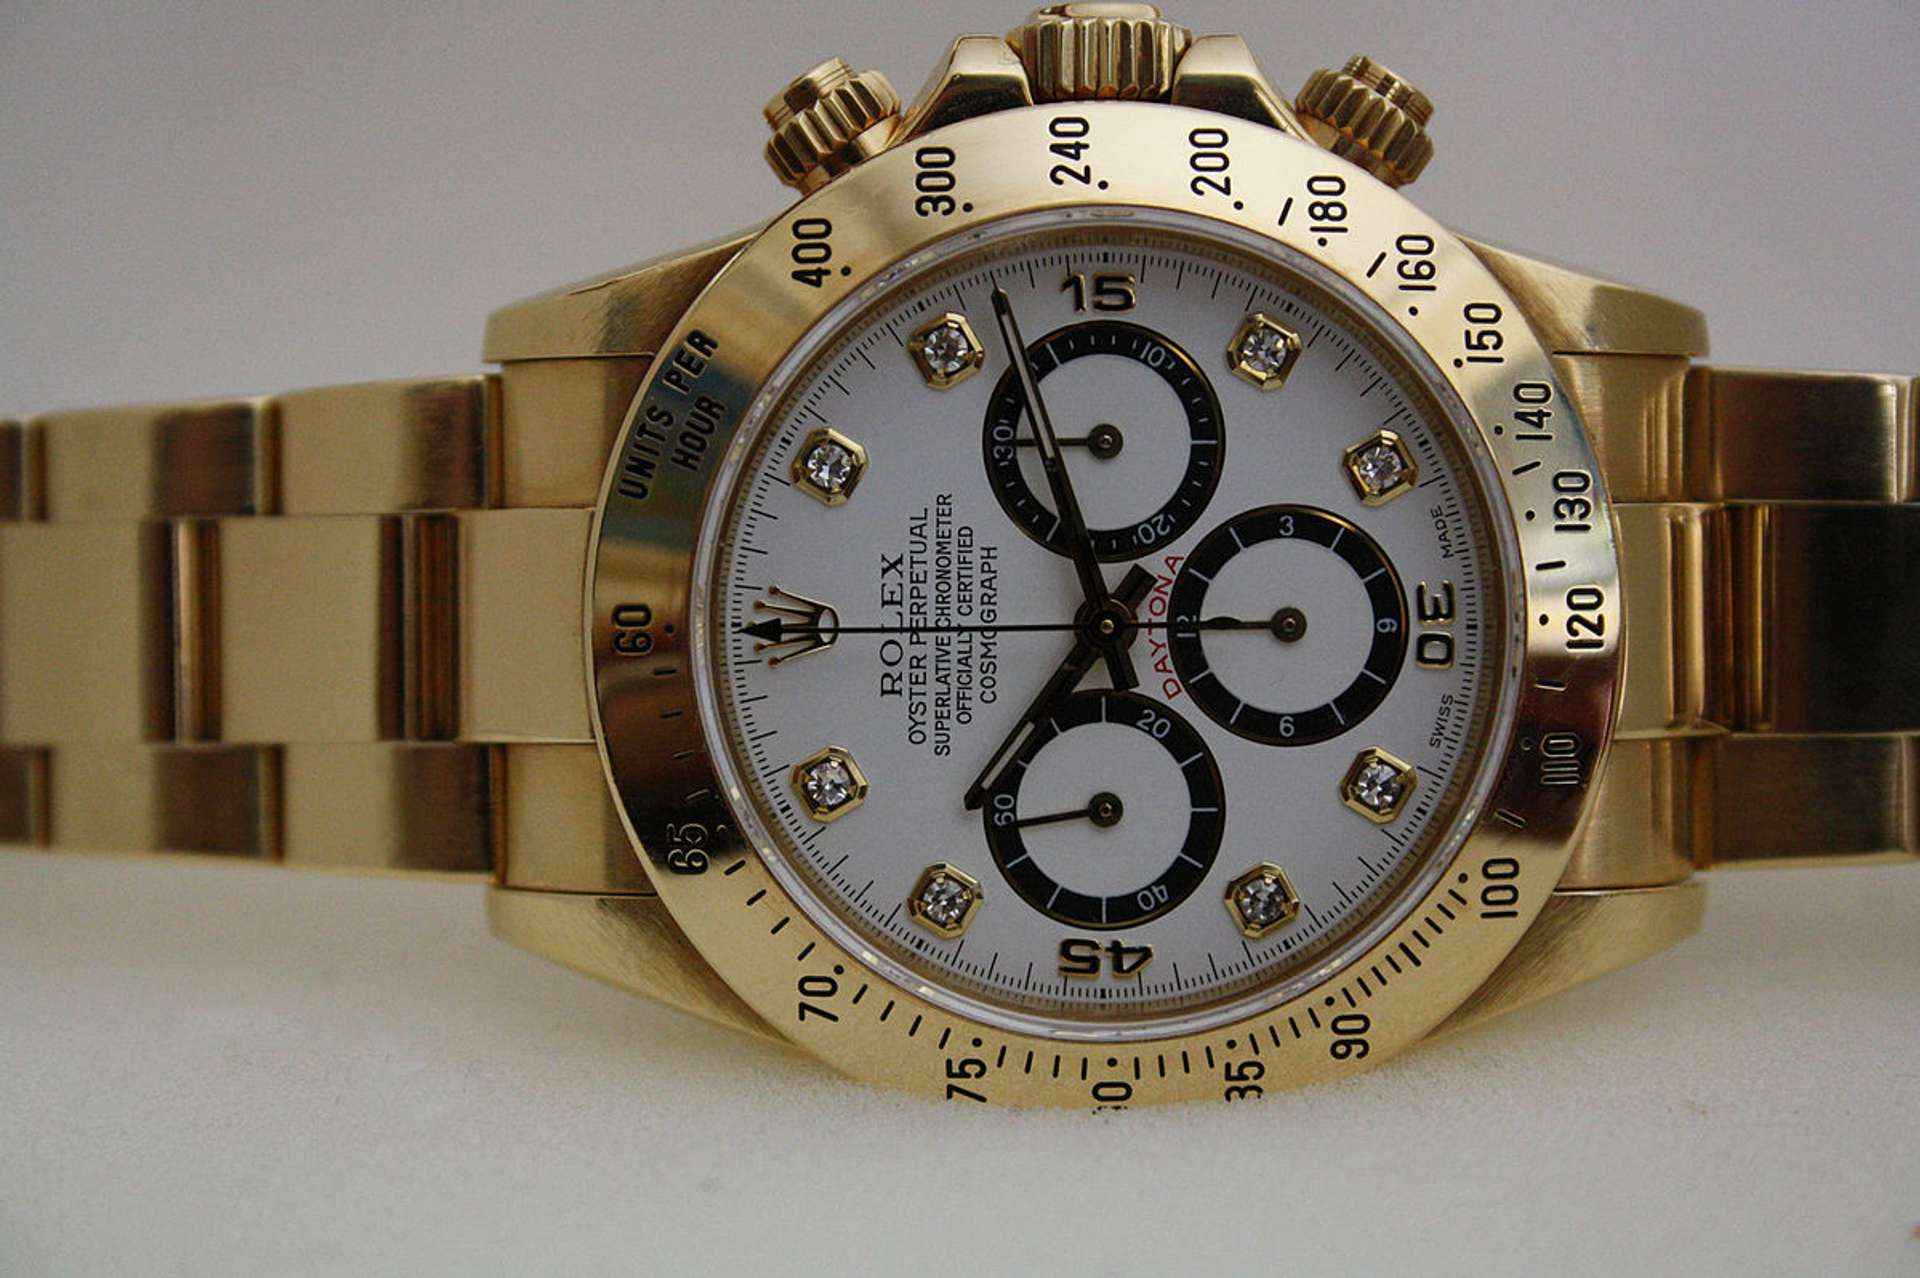 A Rolex Daytona, first launched in 1963. Set against a white background, the watch has a gold metal strap and a white face with three subdials.